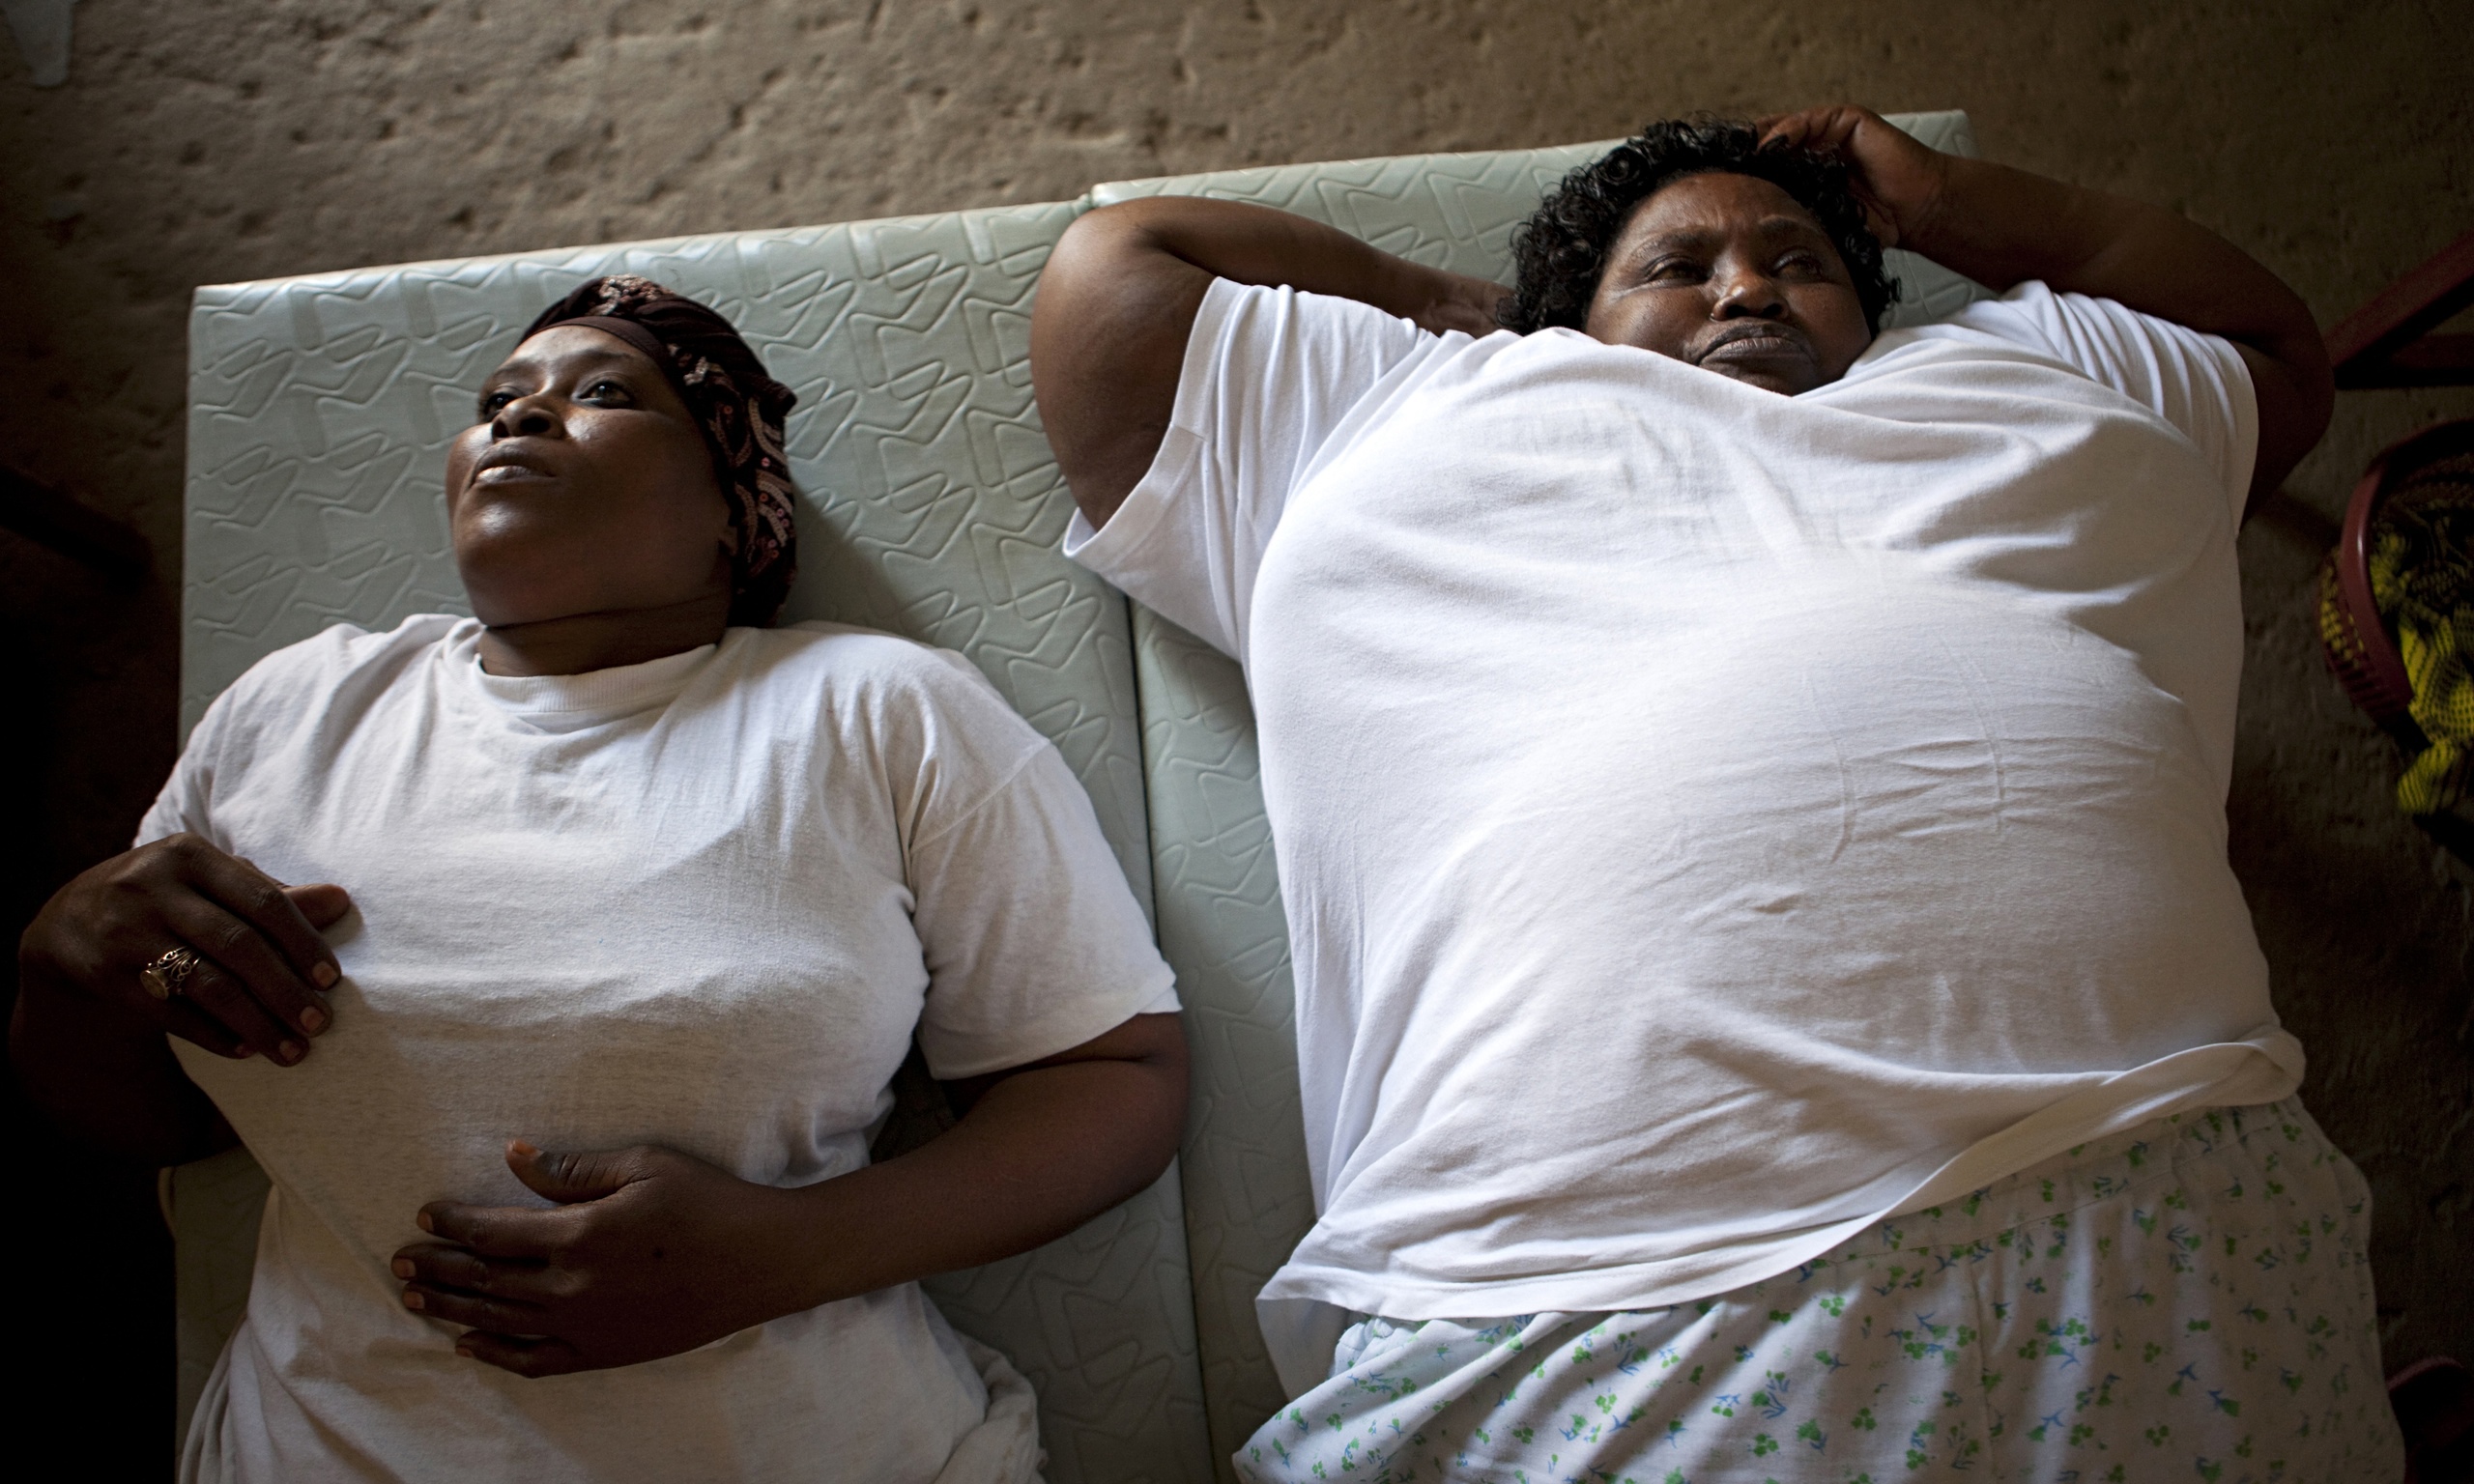 RISING HEALTH CONCERNS: OBESITY AND LIFESTYLE DISEASES IN SOUTH AFRICA